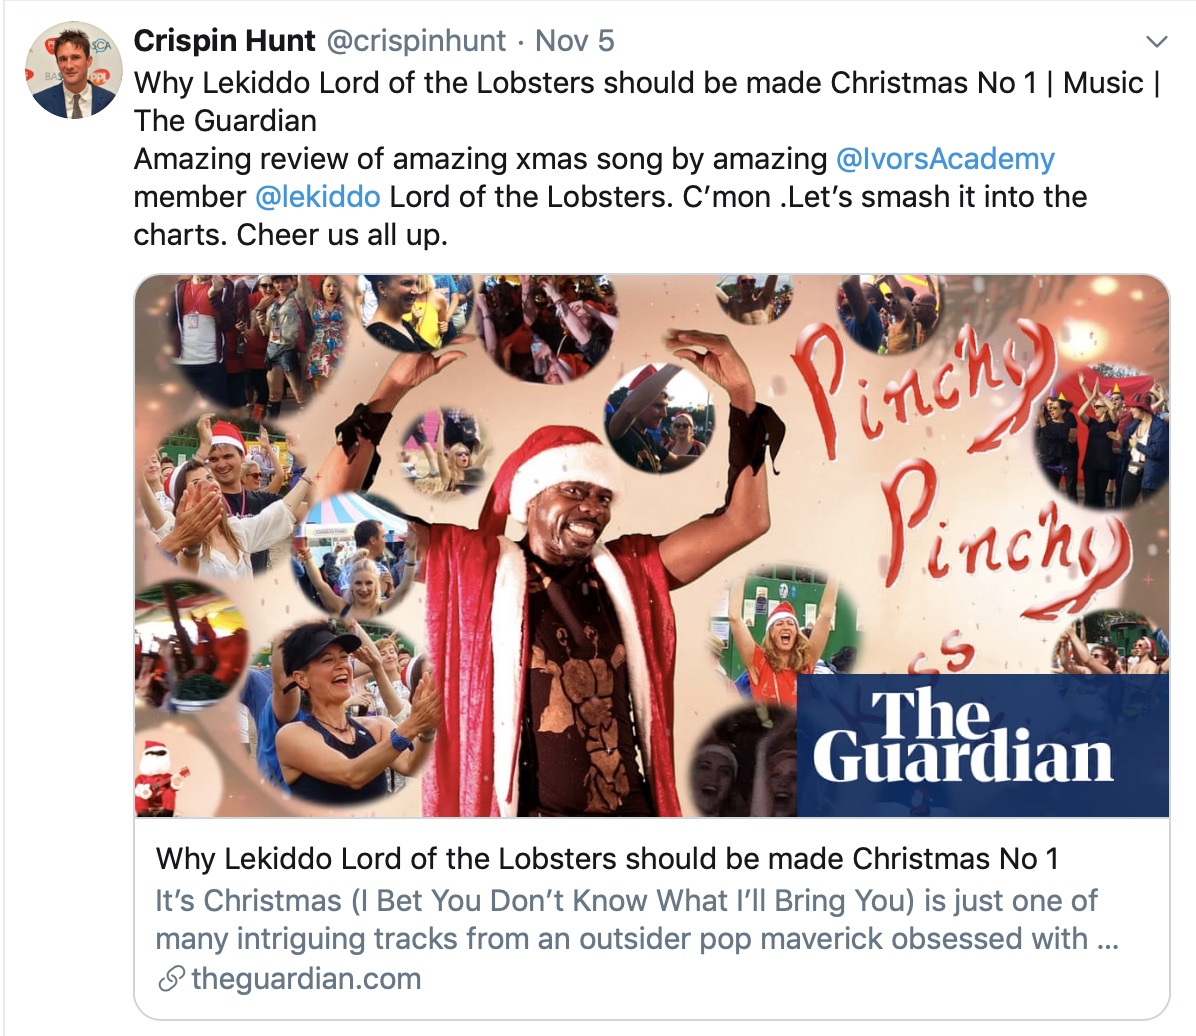 Crispin Hunt,  @crispinhunt The Ivors Academy say: 'Why LEKIDDO - Lord of The Lobtster! should be made Christmas No1 | Music | The Guardian - Amazing review in The Guardian of amazing Xmas song by amazing @IvorsAcademy member LEKIDDO - Lord of The Lobsters! C’mon .Let’s smash it into the charts. Cheer us all up' 